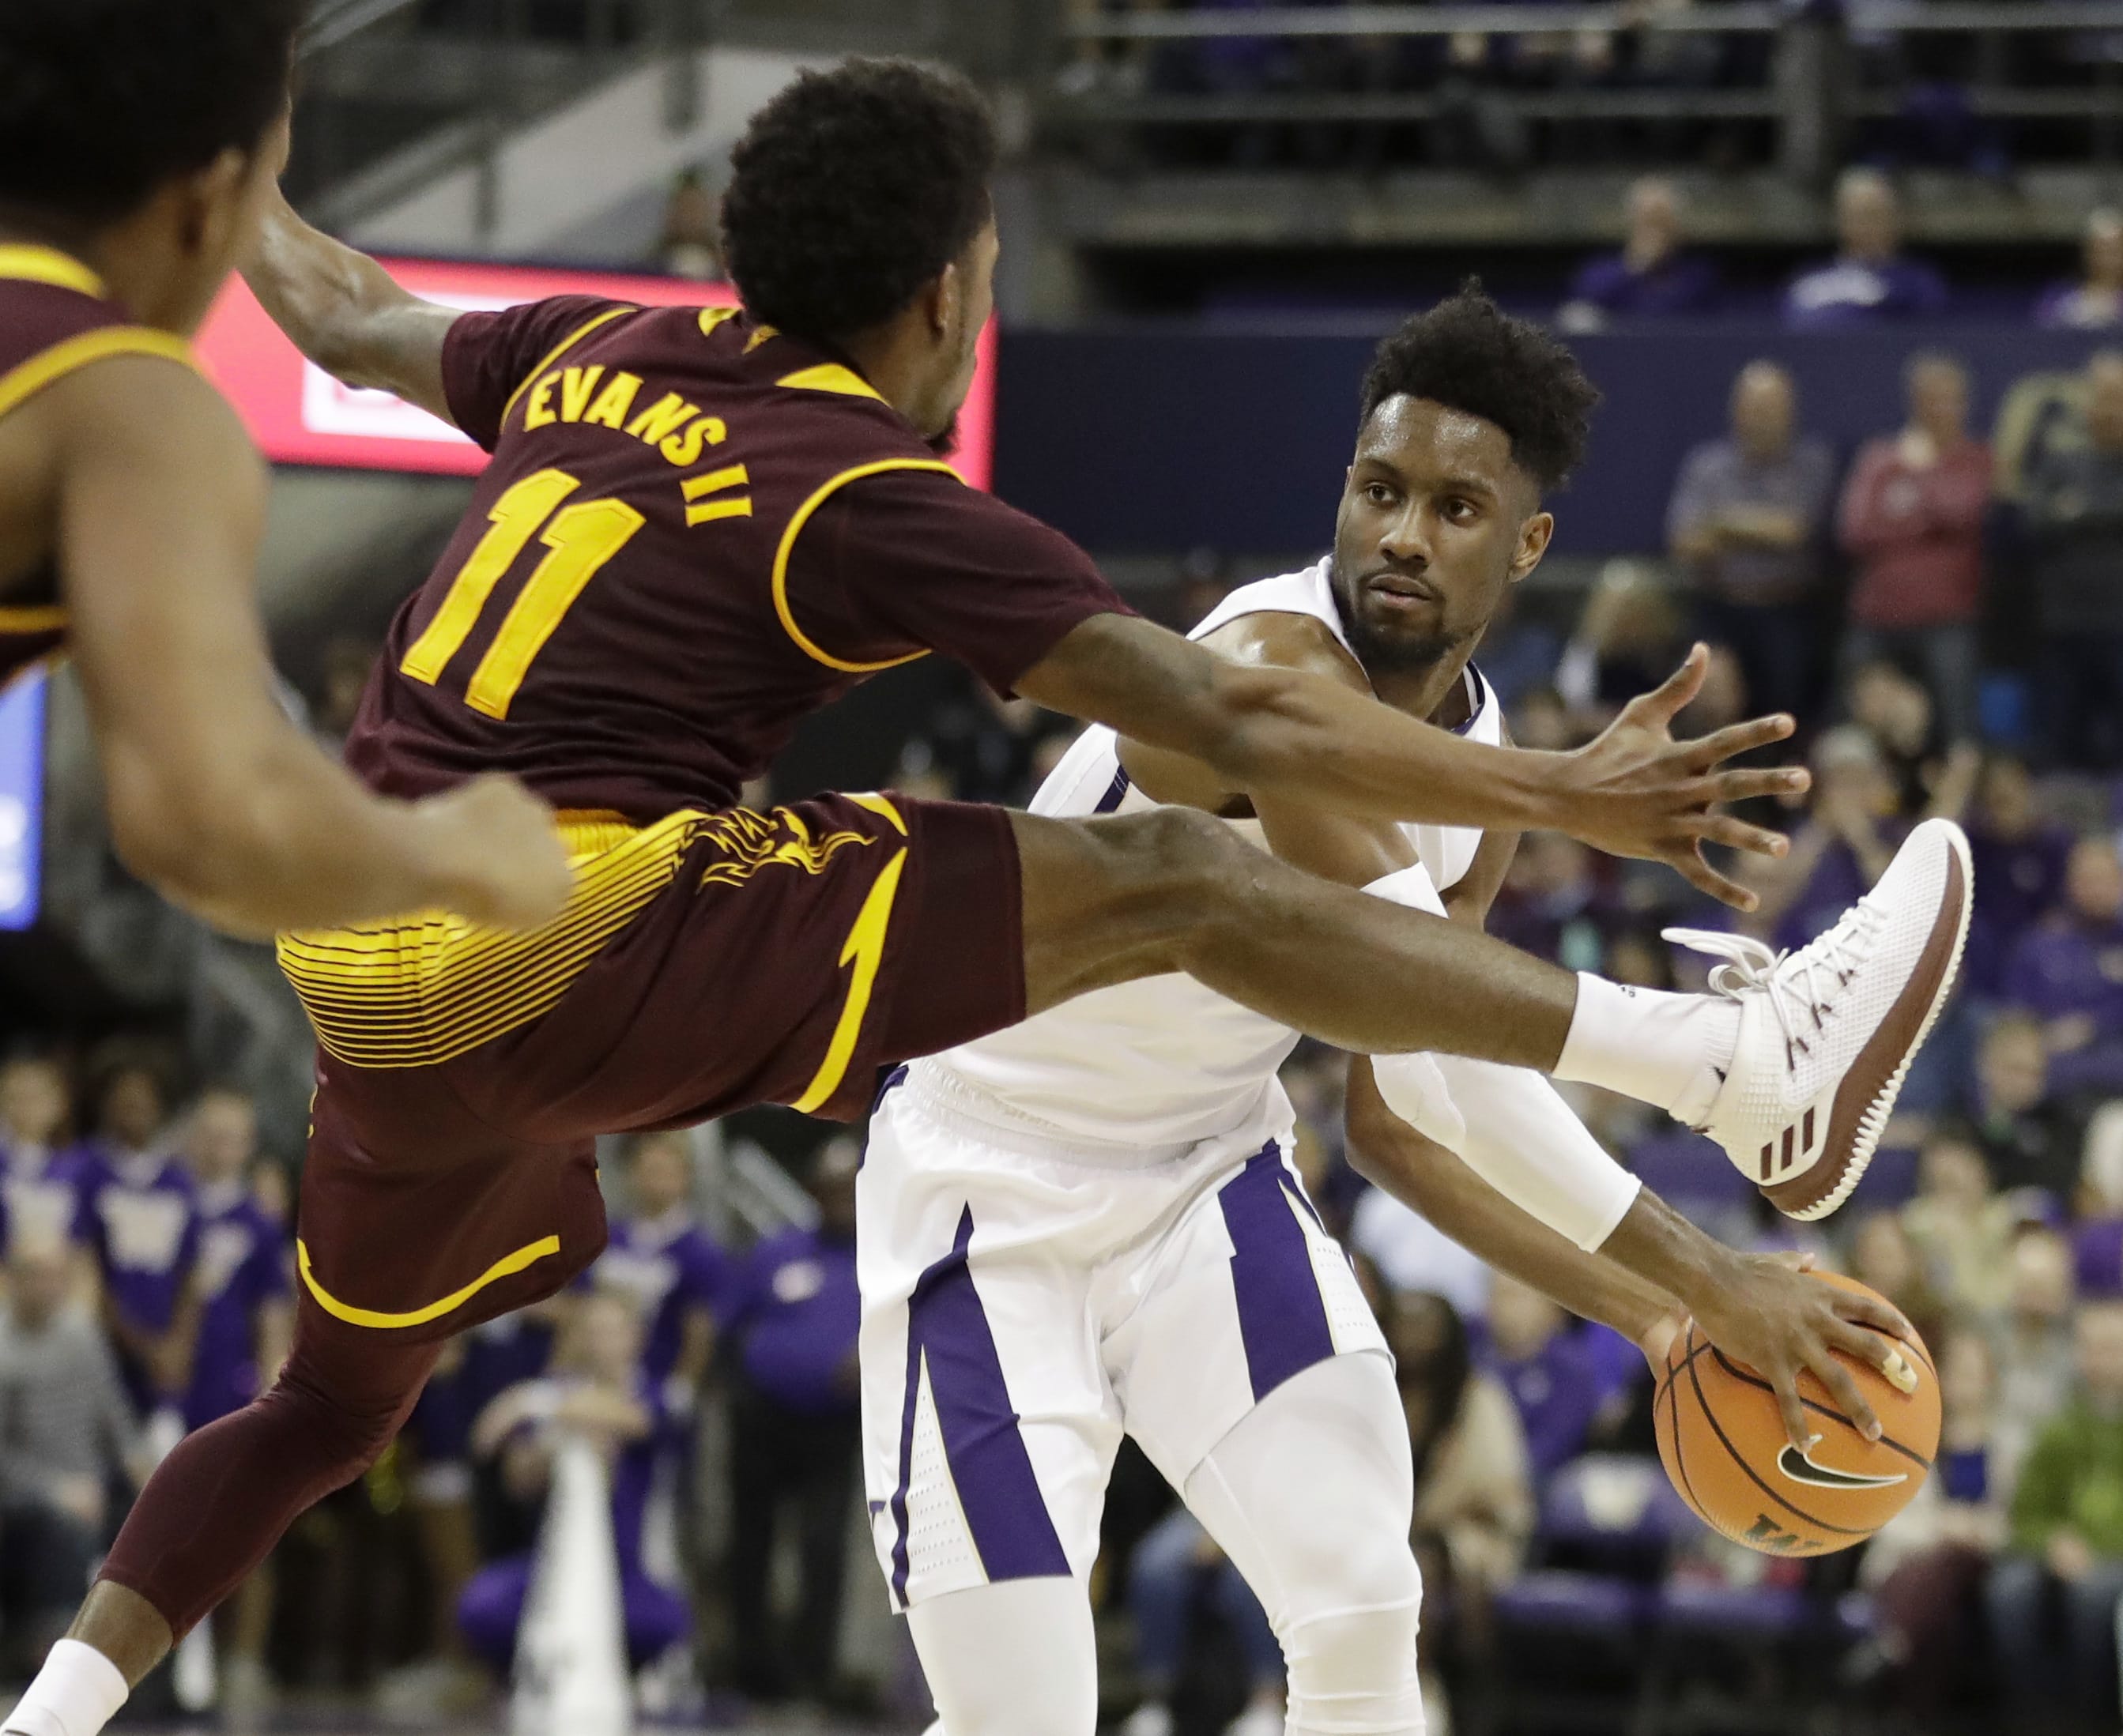 Arizona State guard Shannon Evans II (11) tries to block a pass by Washington guard Jaylen Nowell, right, in the first half of an NCAA college basketball game, Thursday, Feb. 1, 2018, in Seattle. (AP Photo/Ted S.